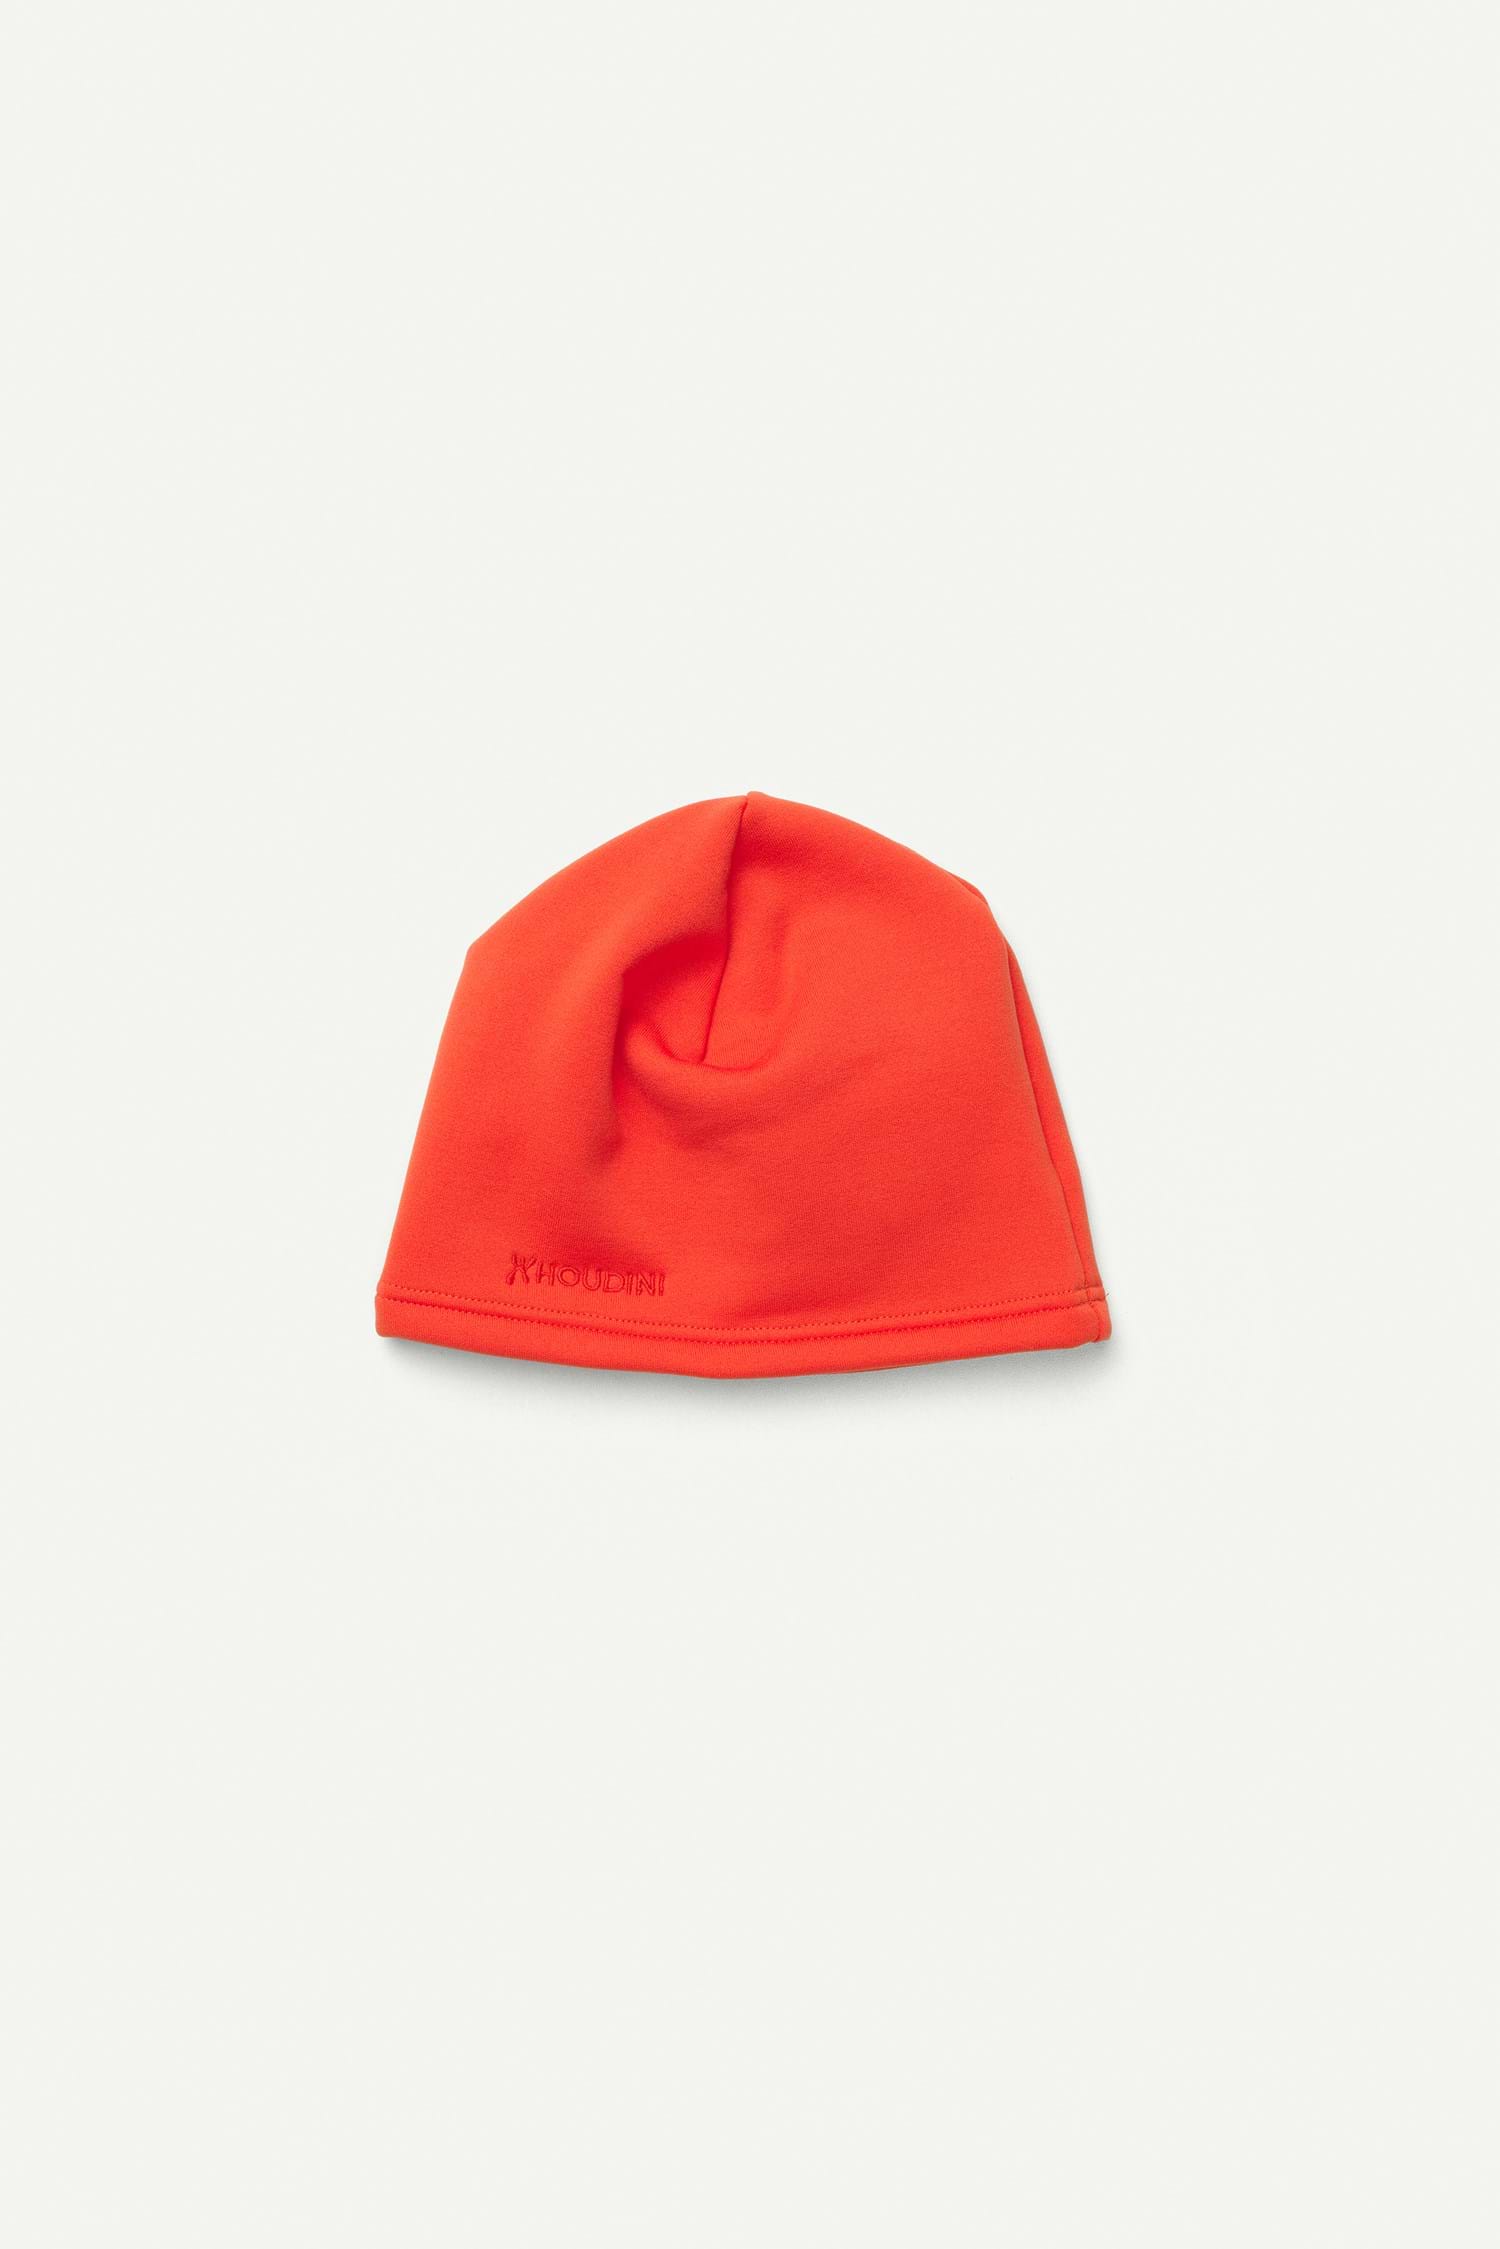 Houdini Kids Power Hat, More Than Red, 48/50